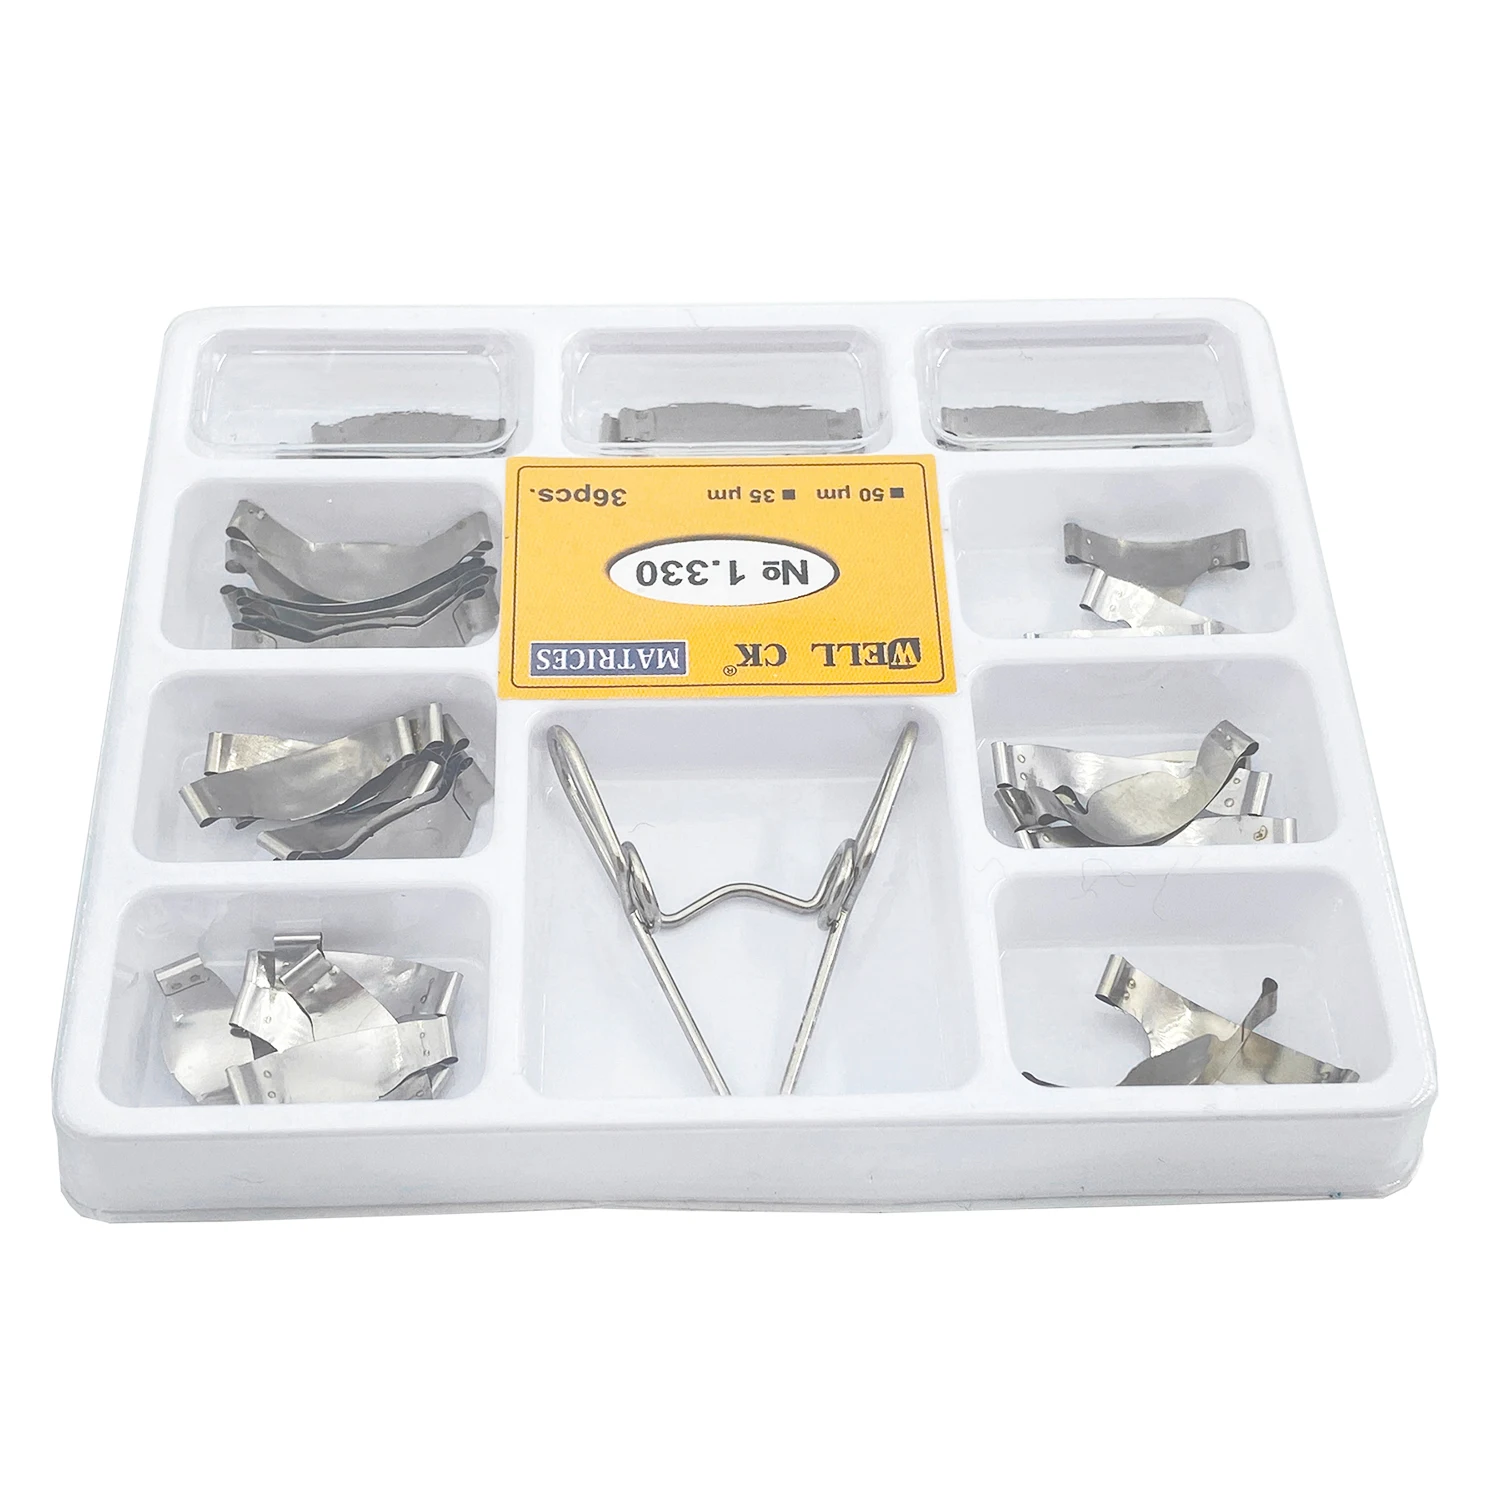 WellCK Dental Matrix with Springclip No.1.330 Sectional Contoured Metal Matrices Full kit for Teeth Replacement Dentsit Tools images - 6